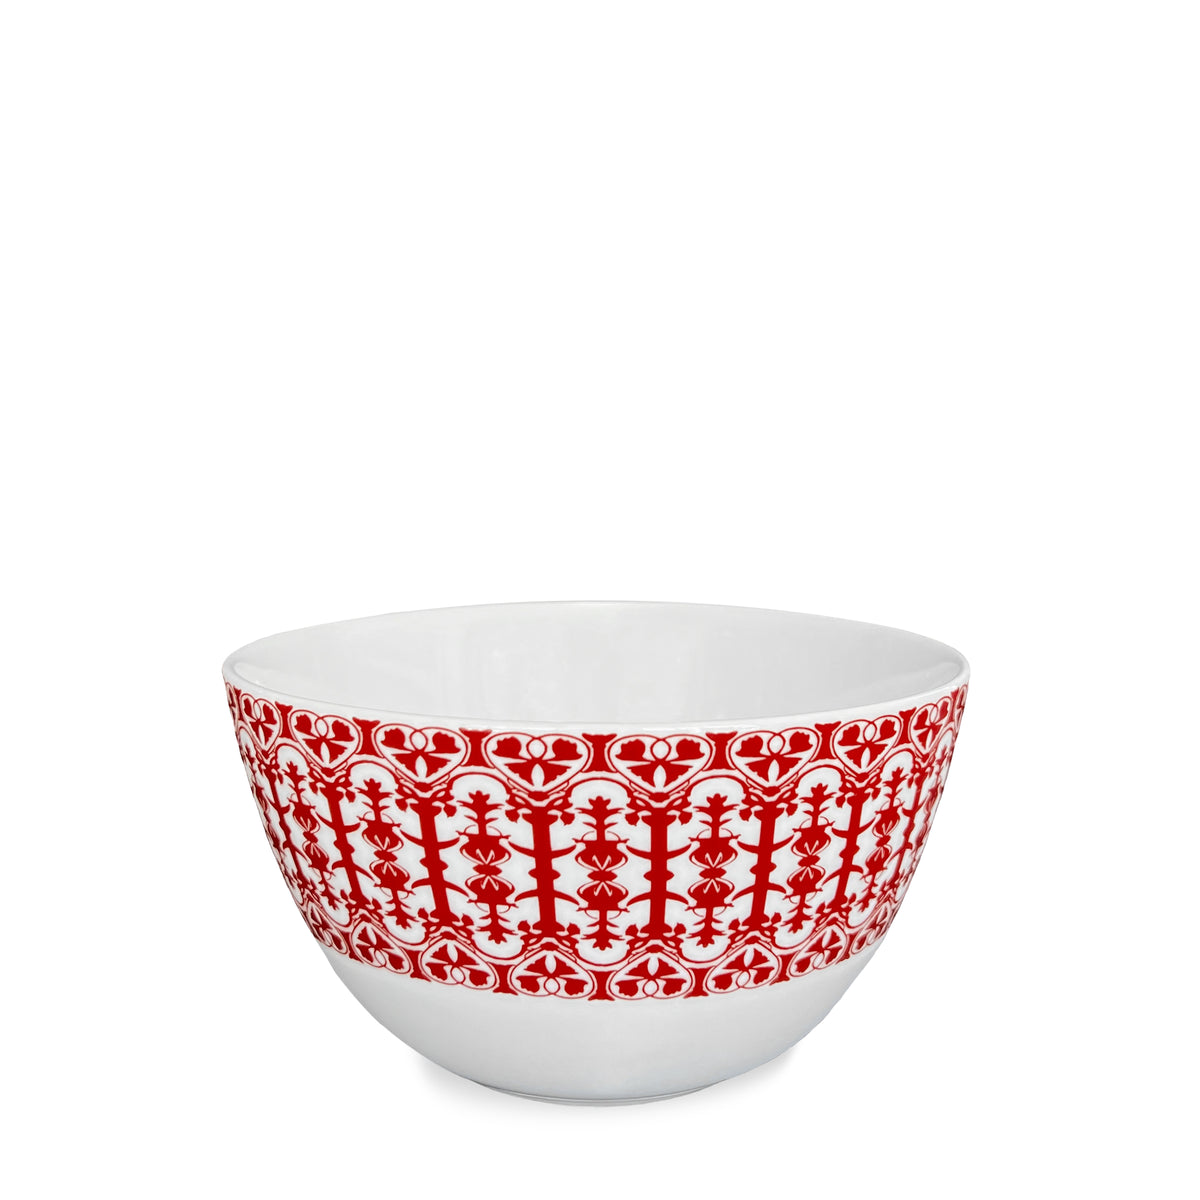 A high-fired porcelain bowl featuring an intricate red pattern around its exterior, embodying the charm of Caskata&#39;s Casablanca Crimson Cereal Bowl.